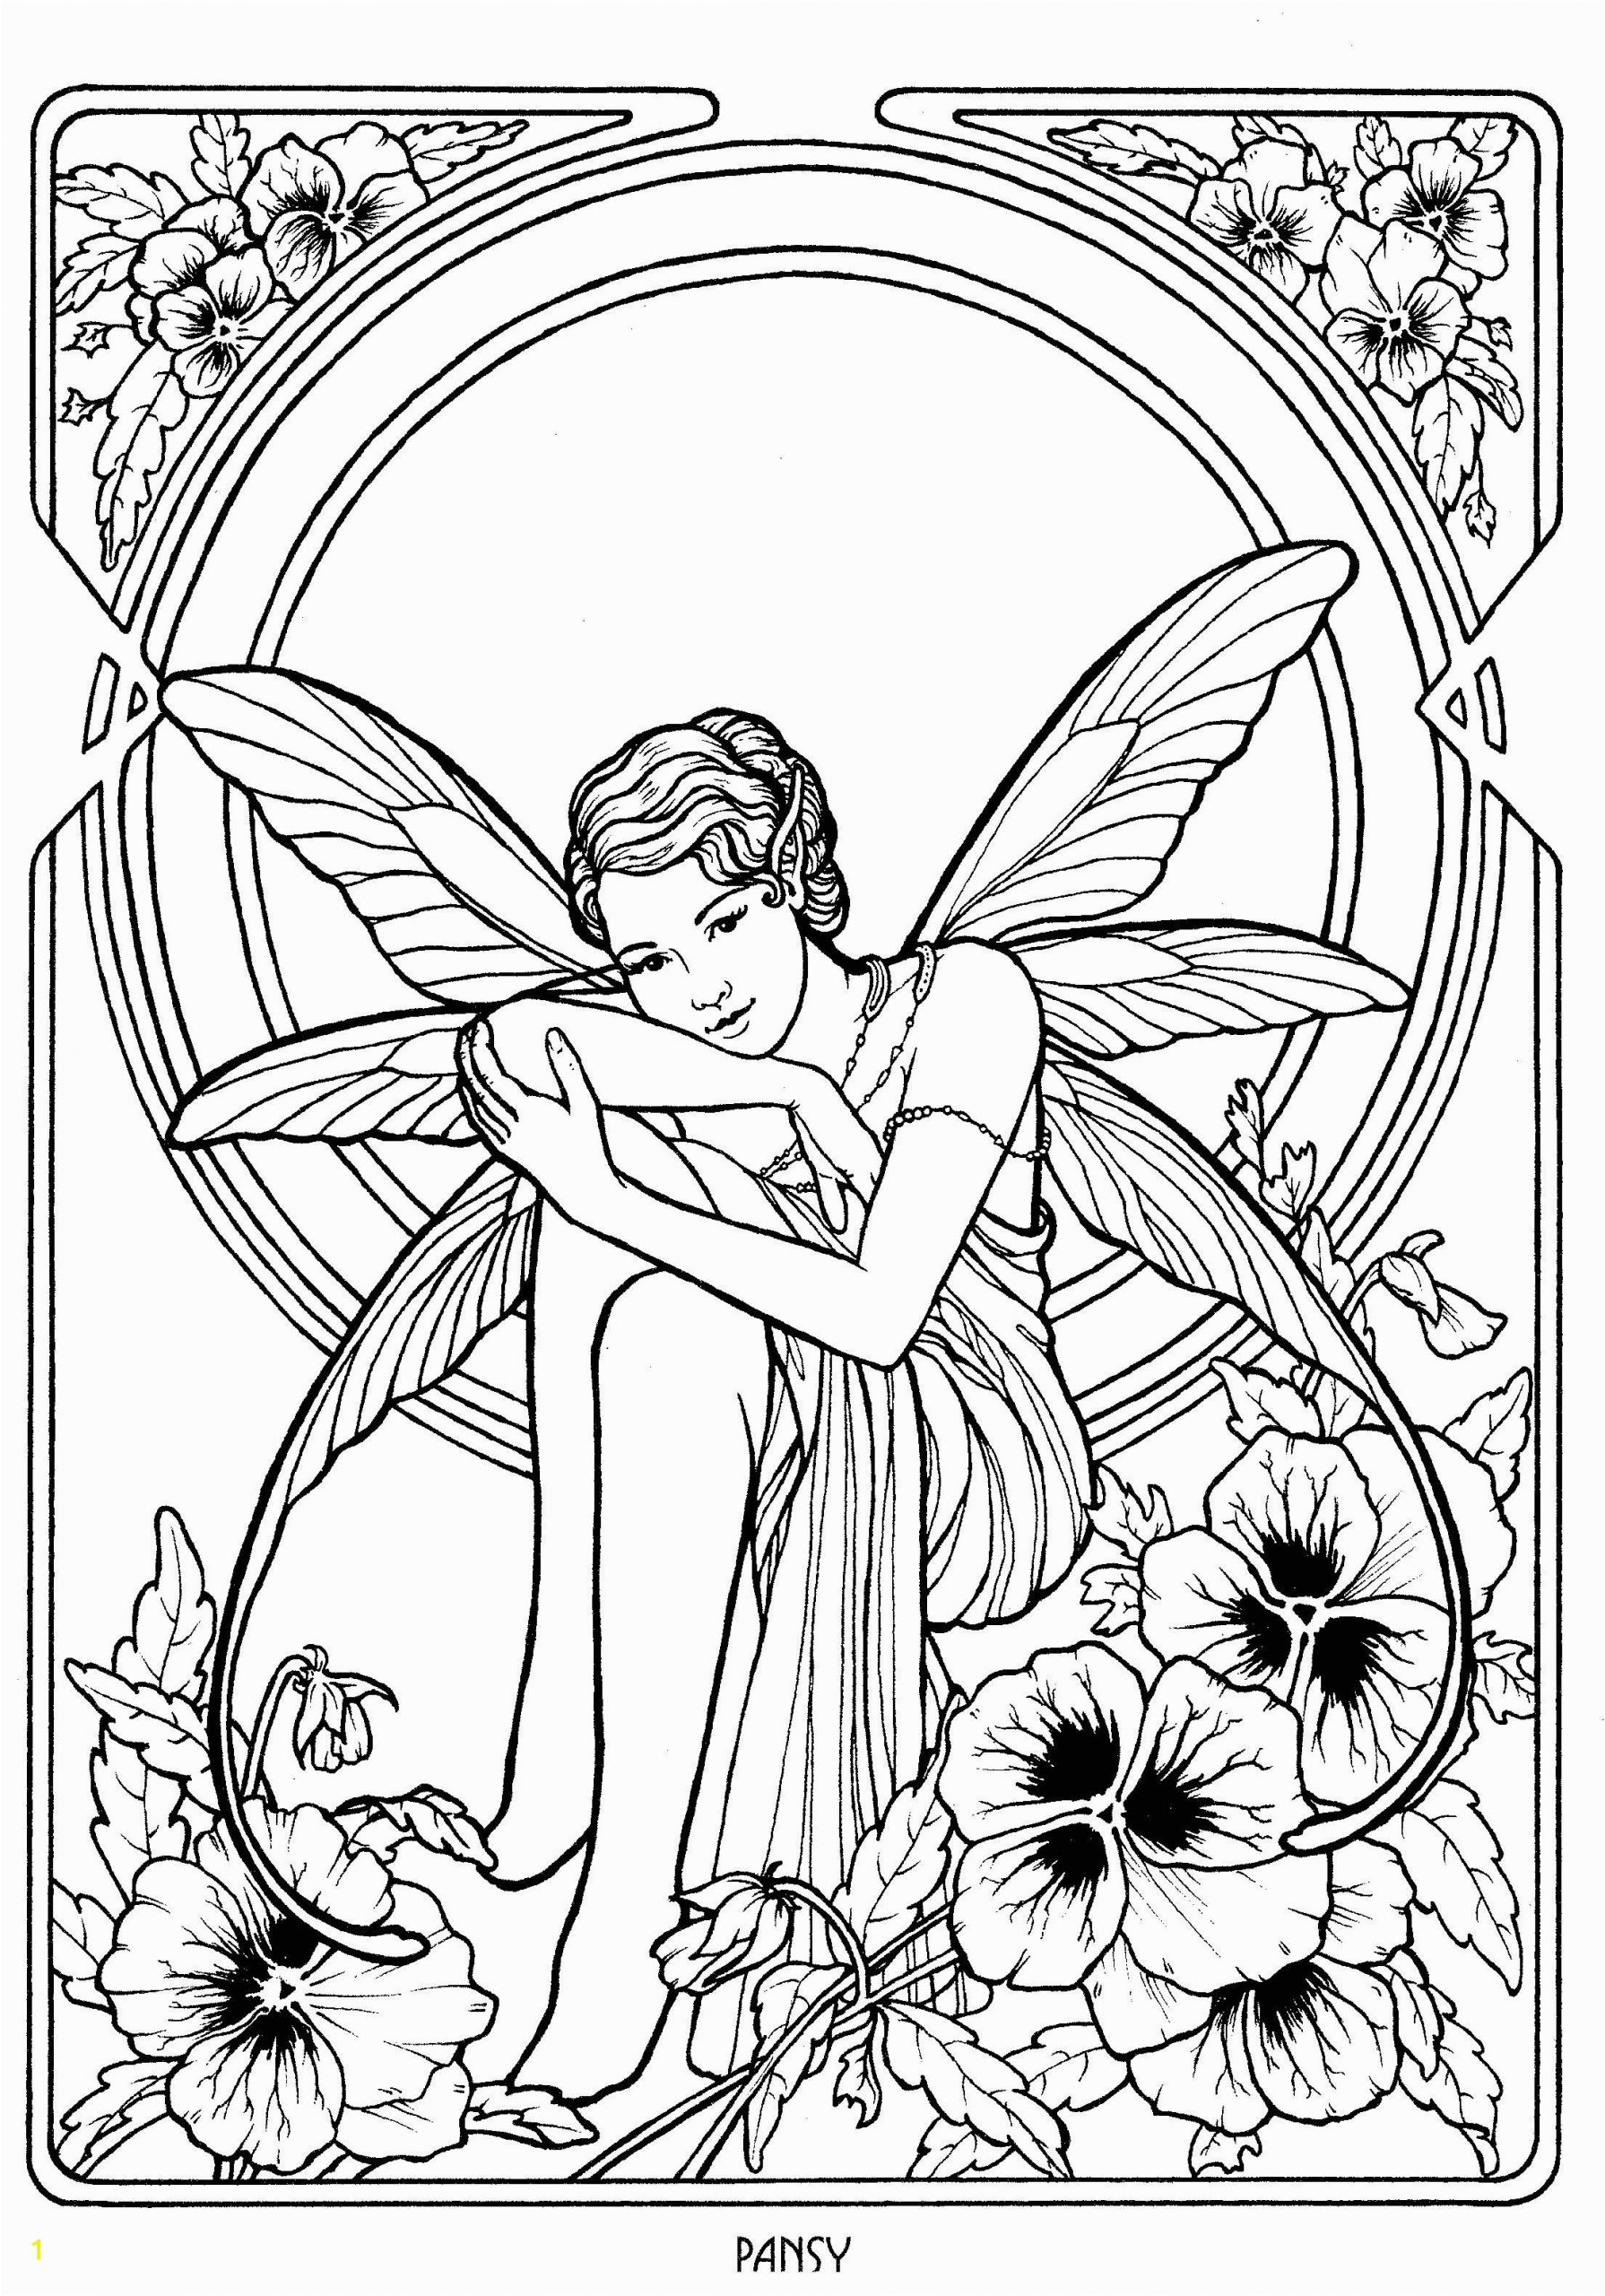 Mythical Creature Fairy Coloring Pages for Adults Fairy 20 with Images